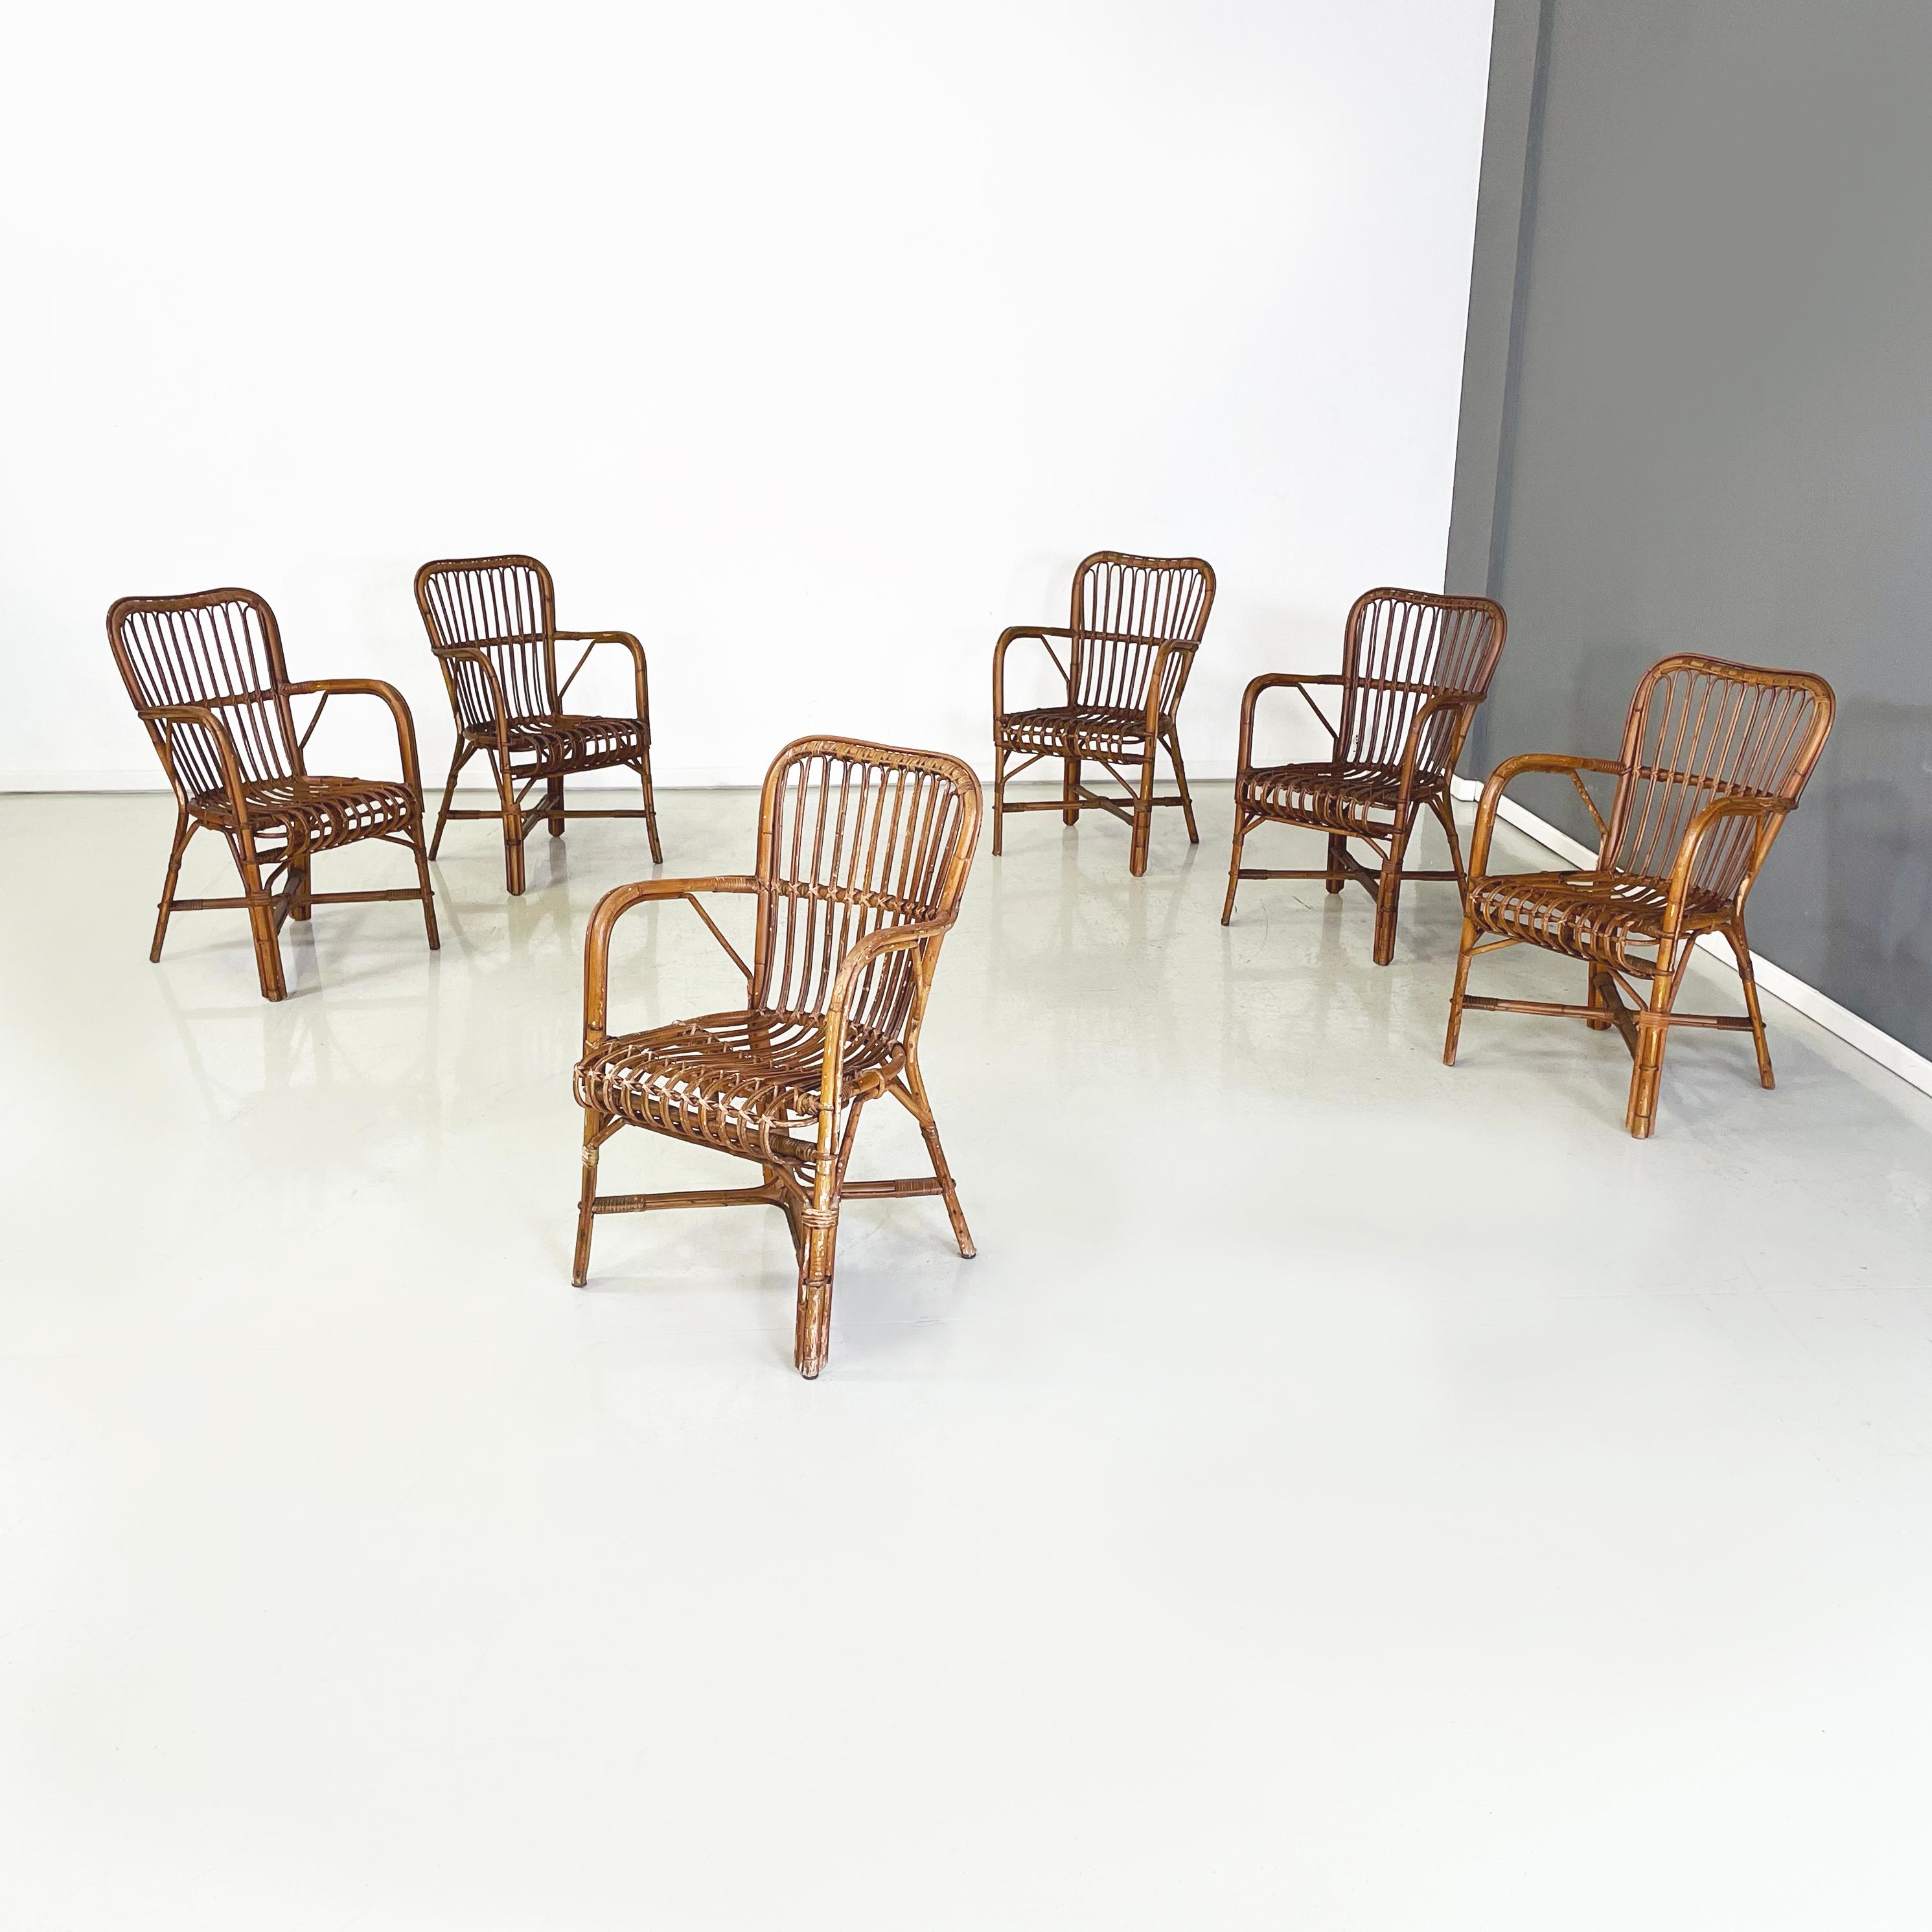 Italian mid-century Outdoor Armchairs in bamboo and rattan, 1960s
Set of6 armchairs with curved armrests in finely woven bamboo of different shades. The legs are joined in the middle by an X-shaped structure. Suitable for outdoor use such as in the